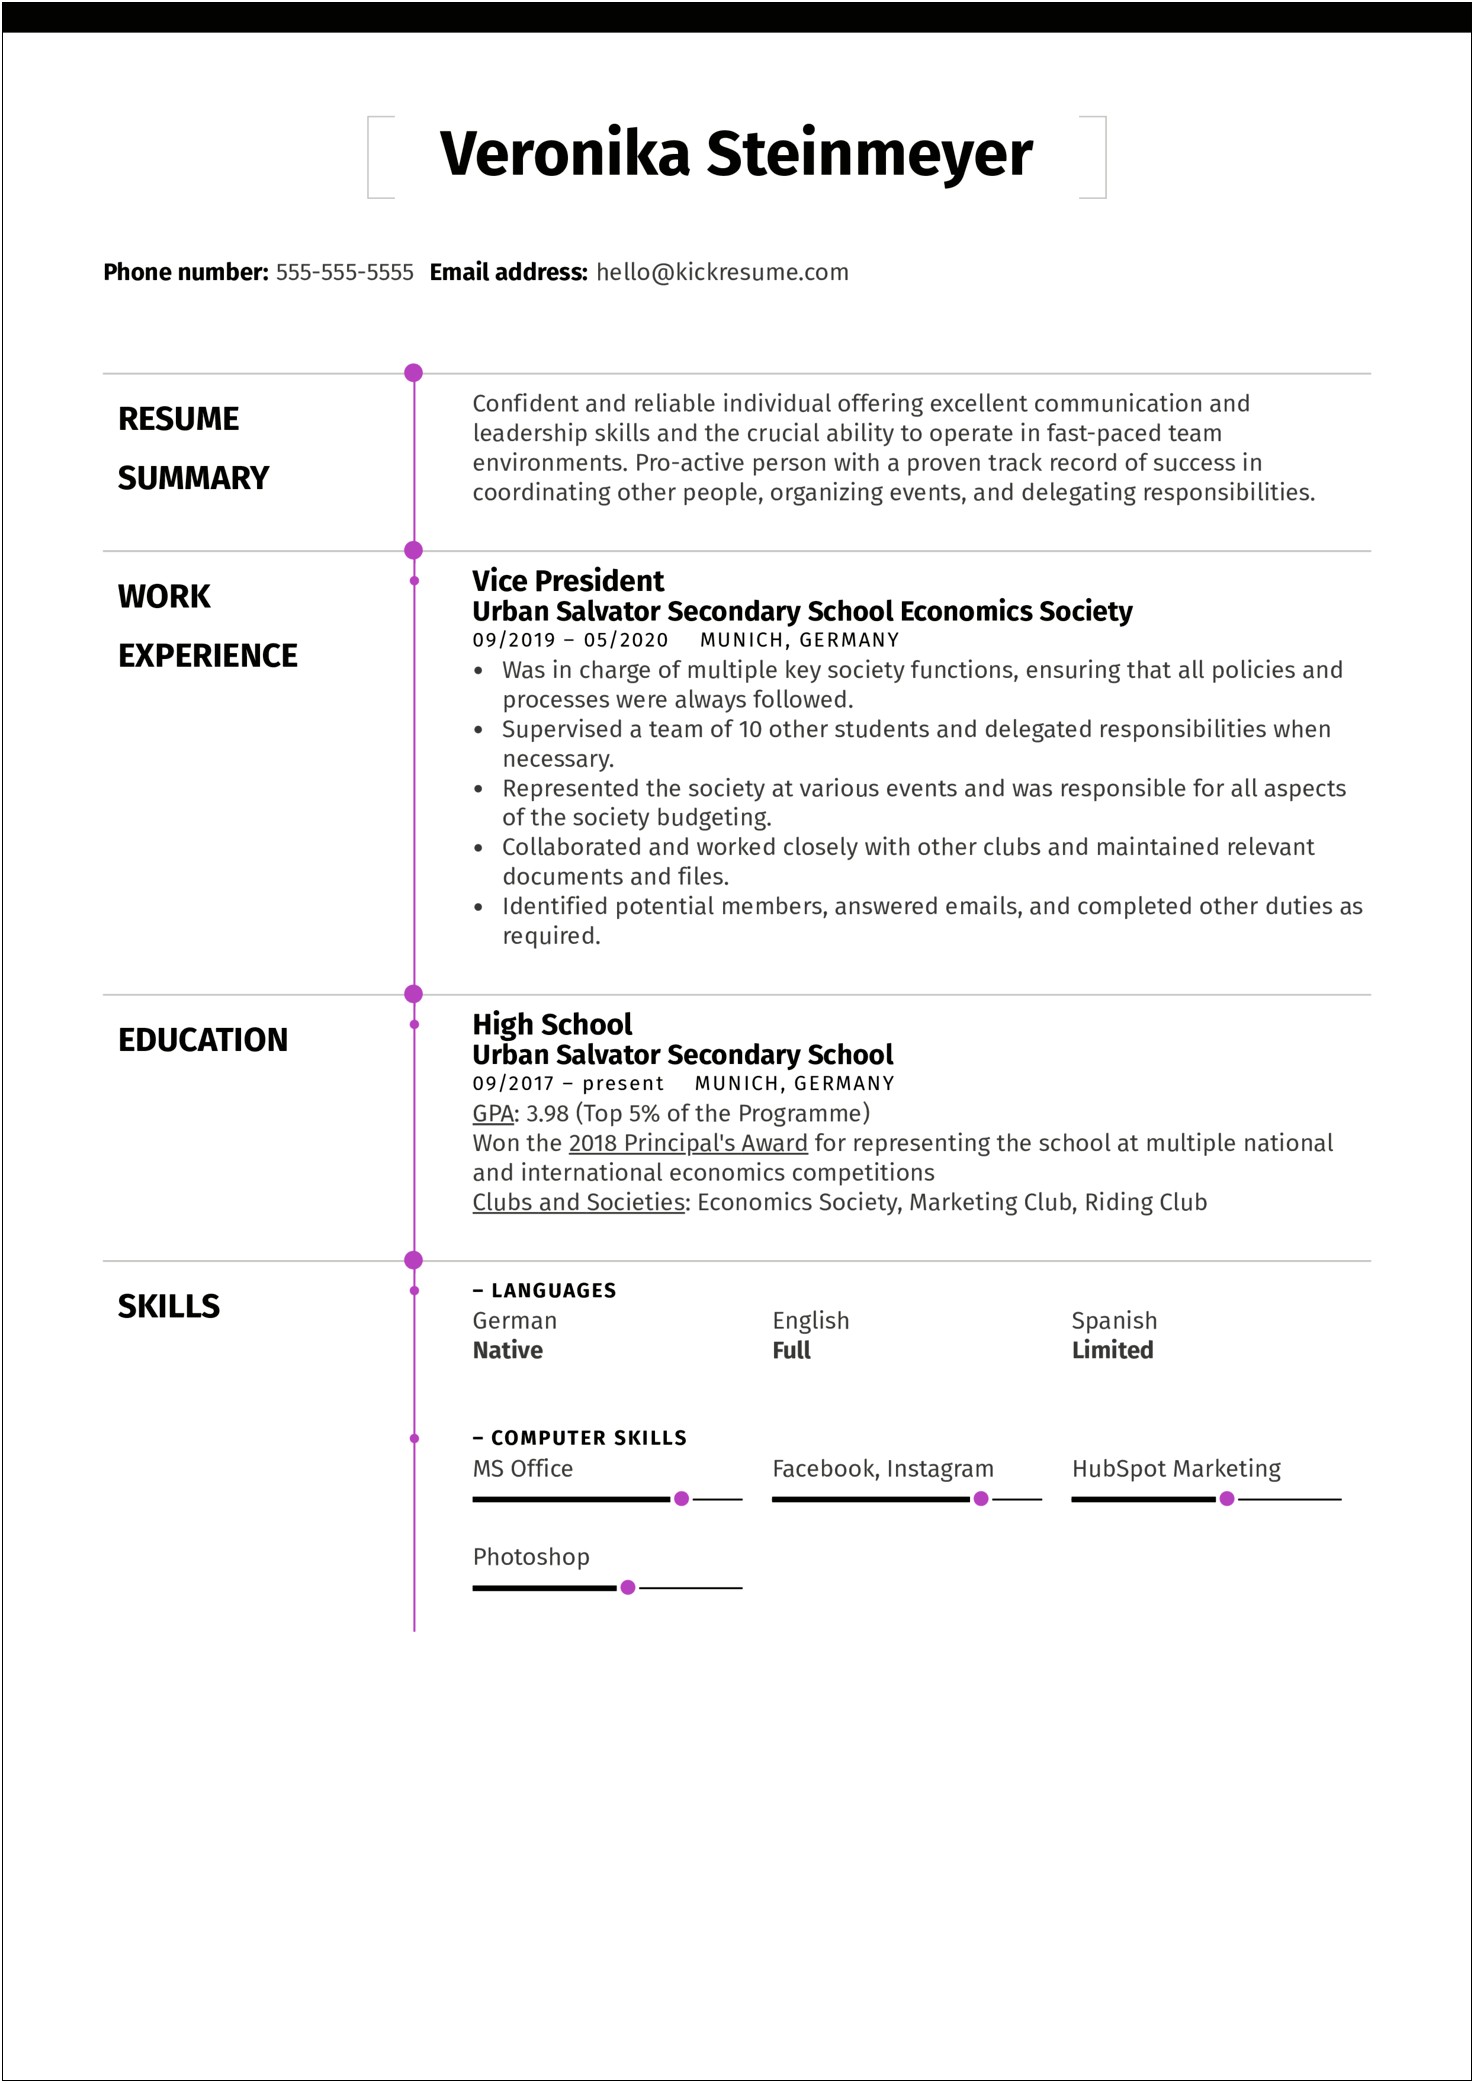 Example Resume For Highschool Student With No Experience